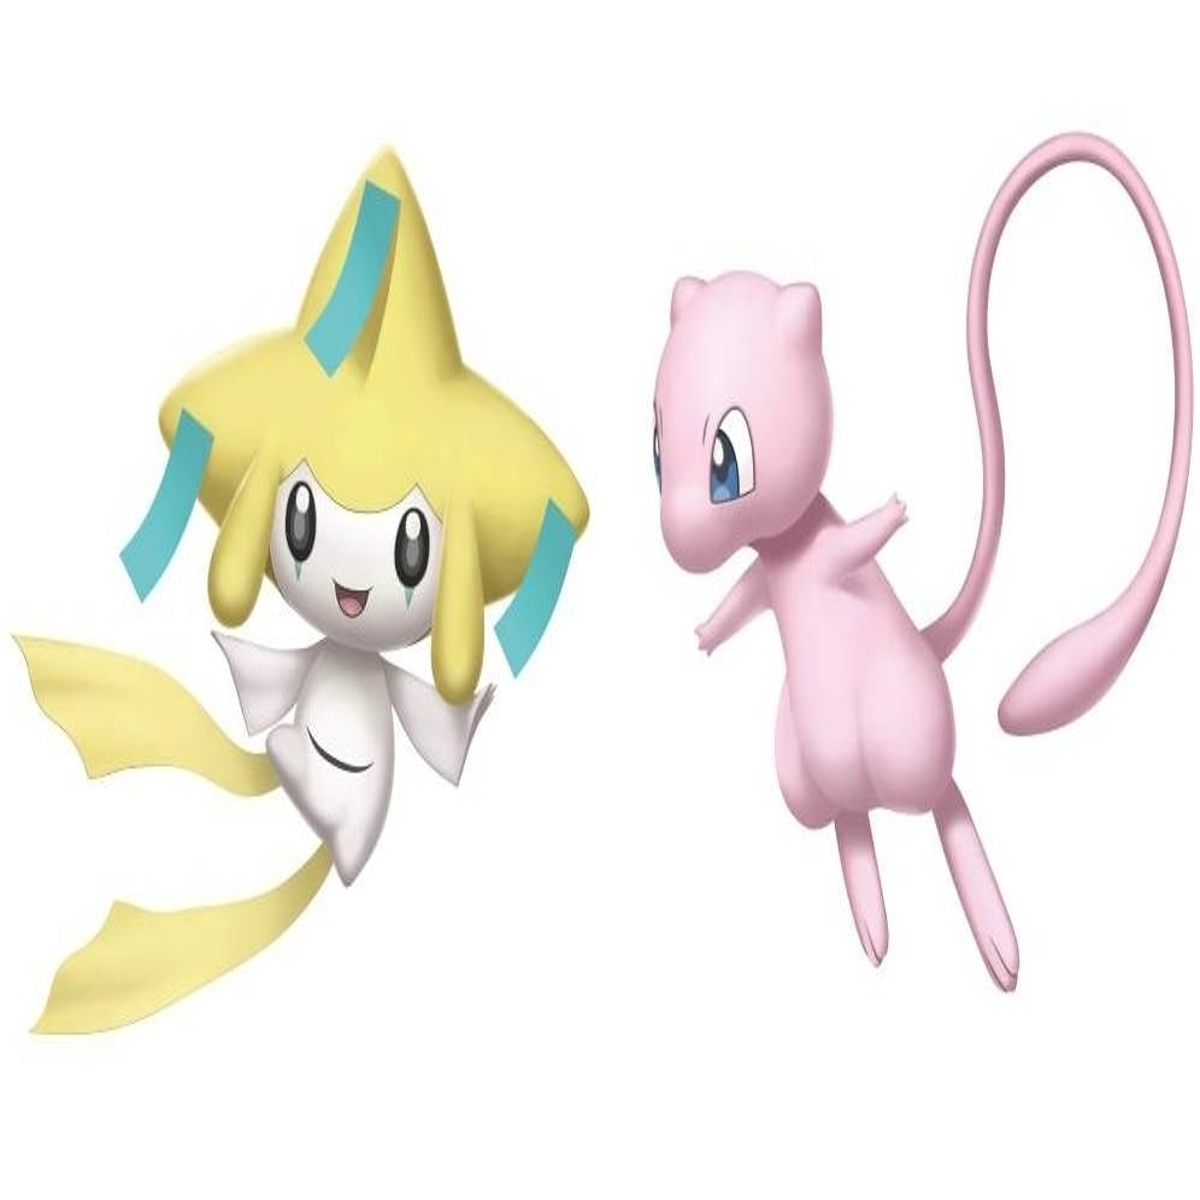 Pokemon Brilliant Diamond and Shining Pearl: How to get Mew and Jirachi -  CNET